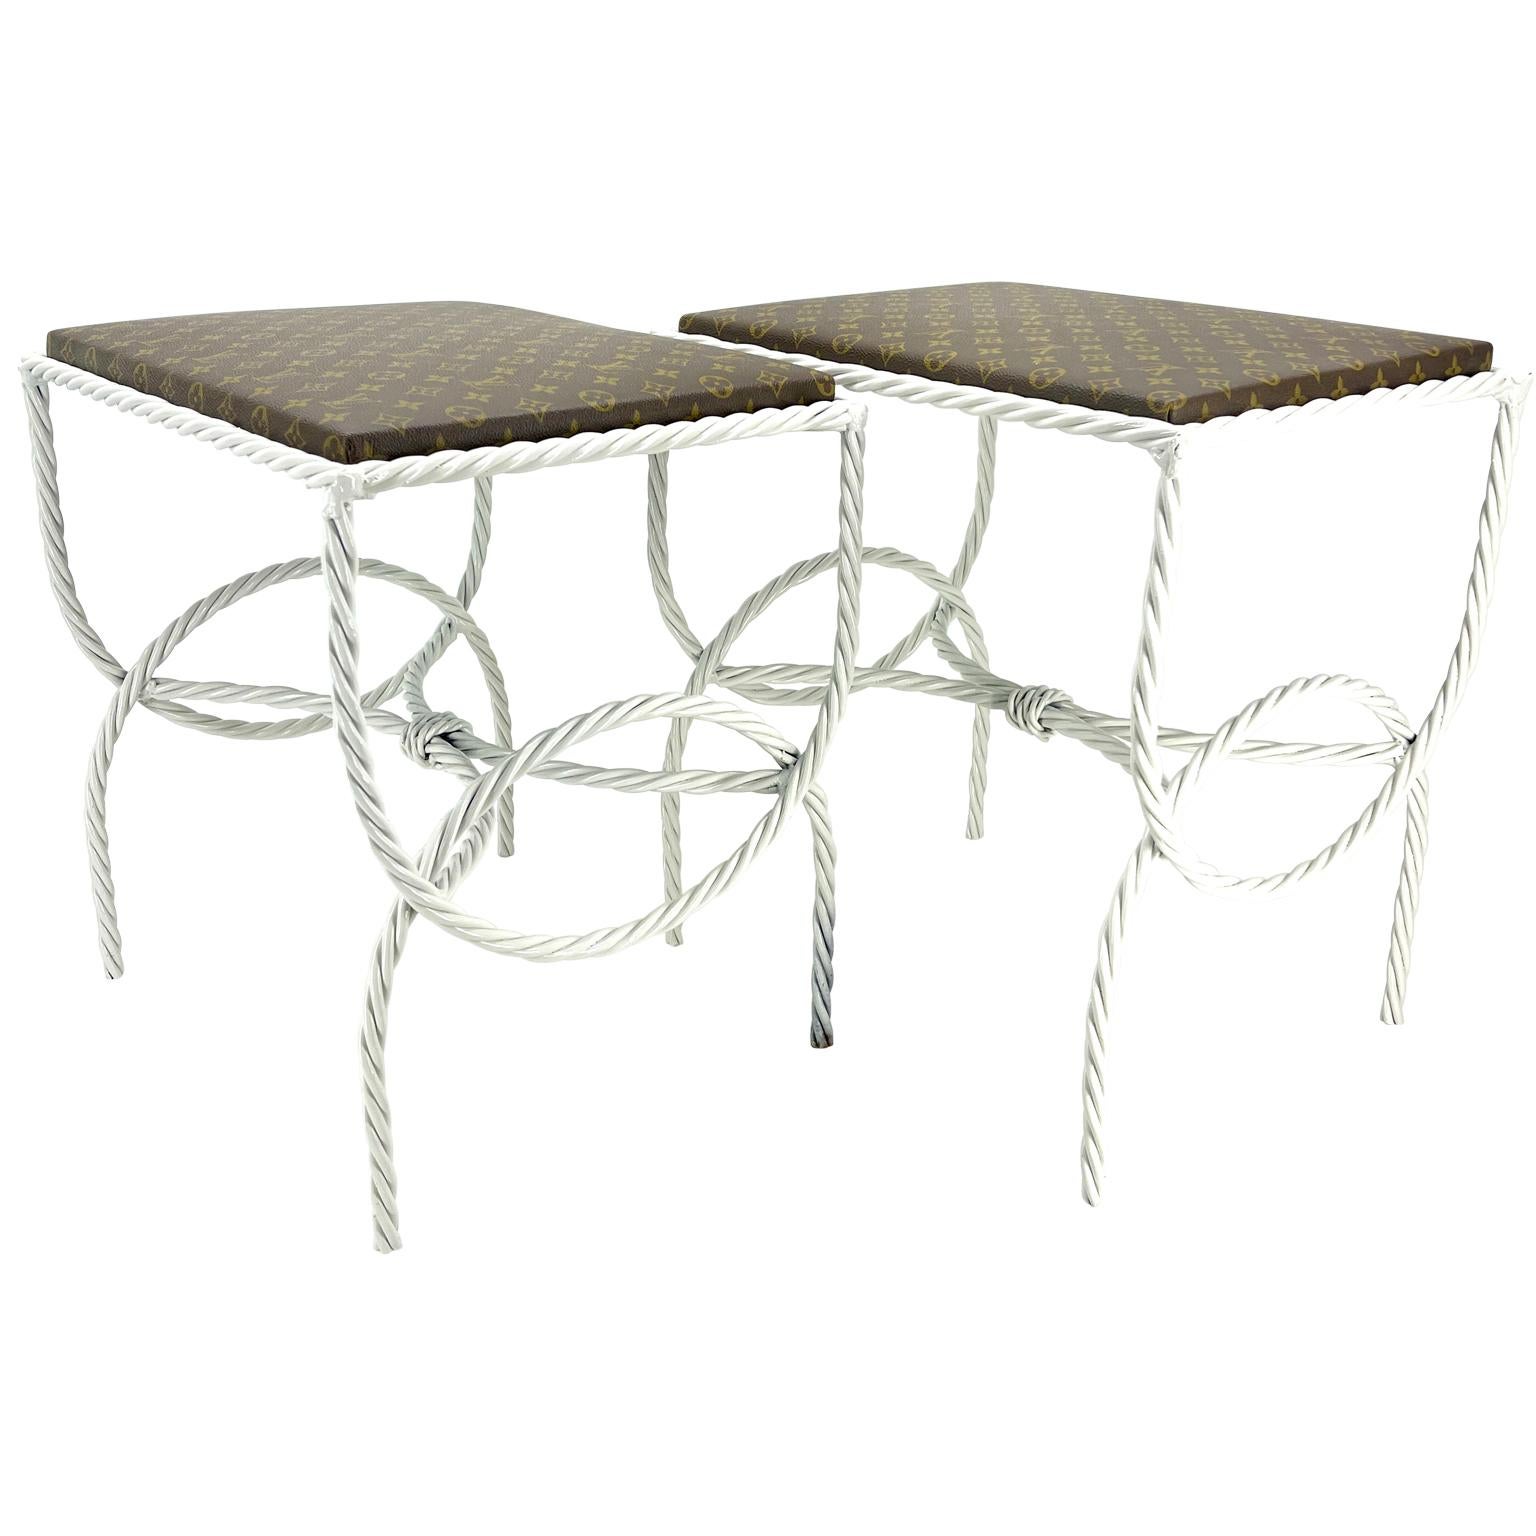 20th Century Pair of Roped Iron Benches Side Tables with Louis Vuitton Monogram Fabric For Sale